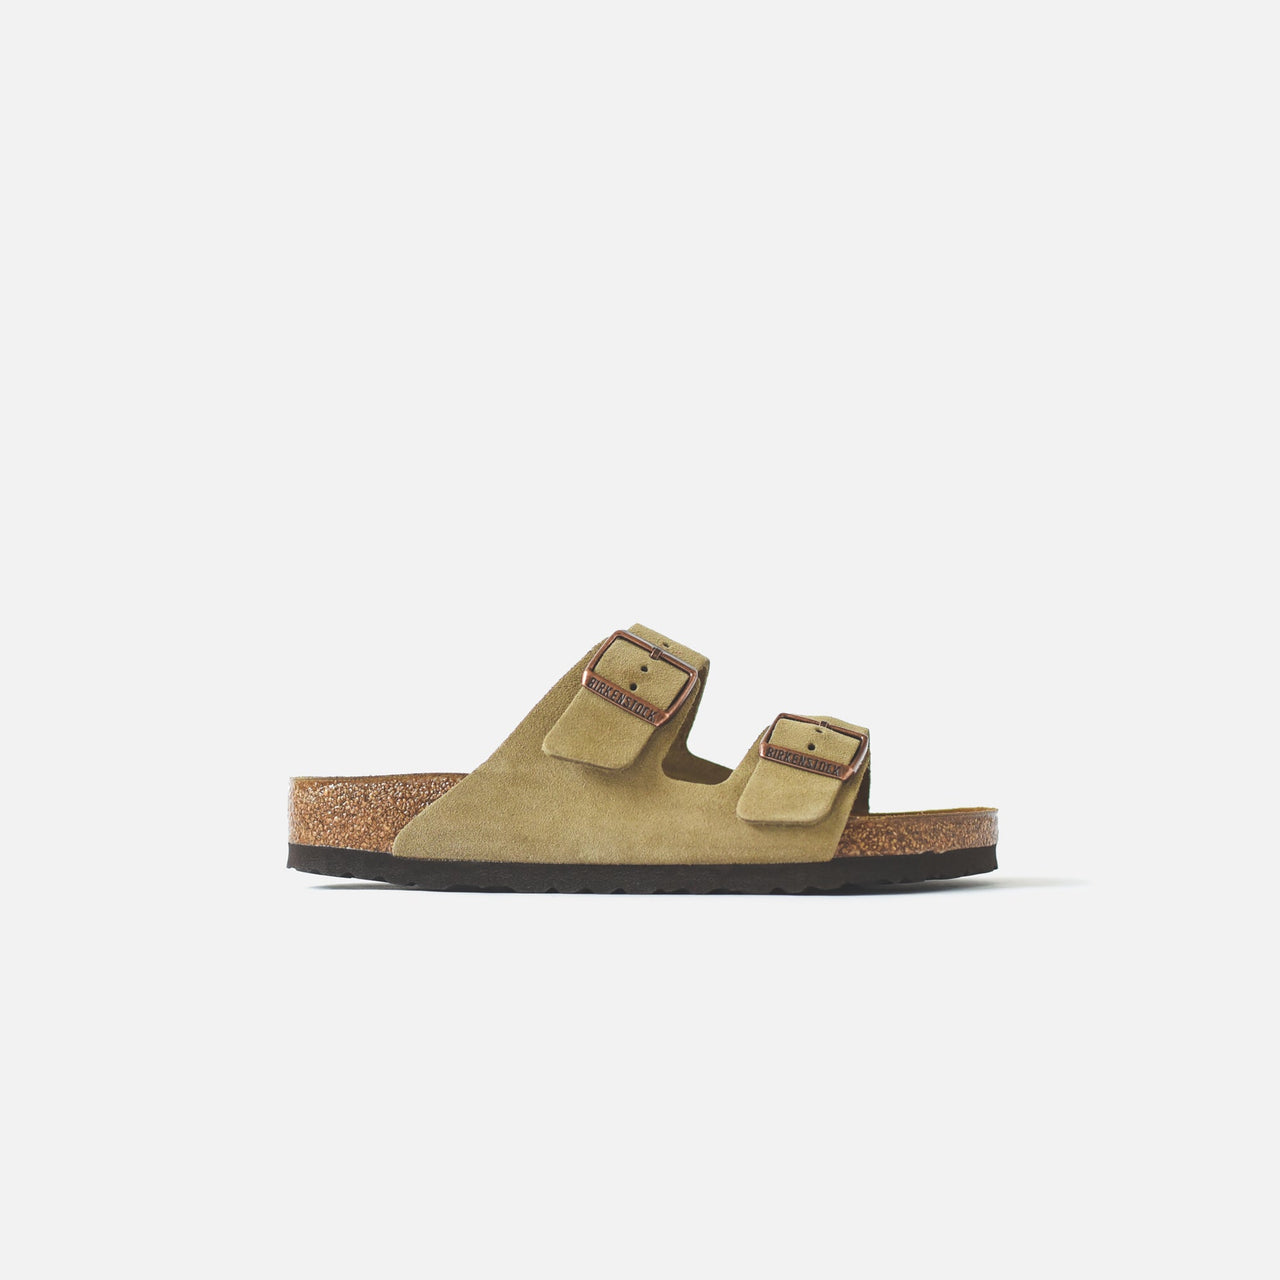 Women's Arizona Suede Taupe Birkenstock sandals with adjustable straps and contoured footbed